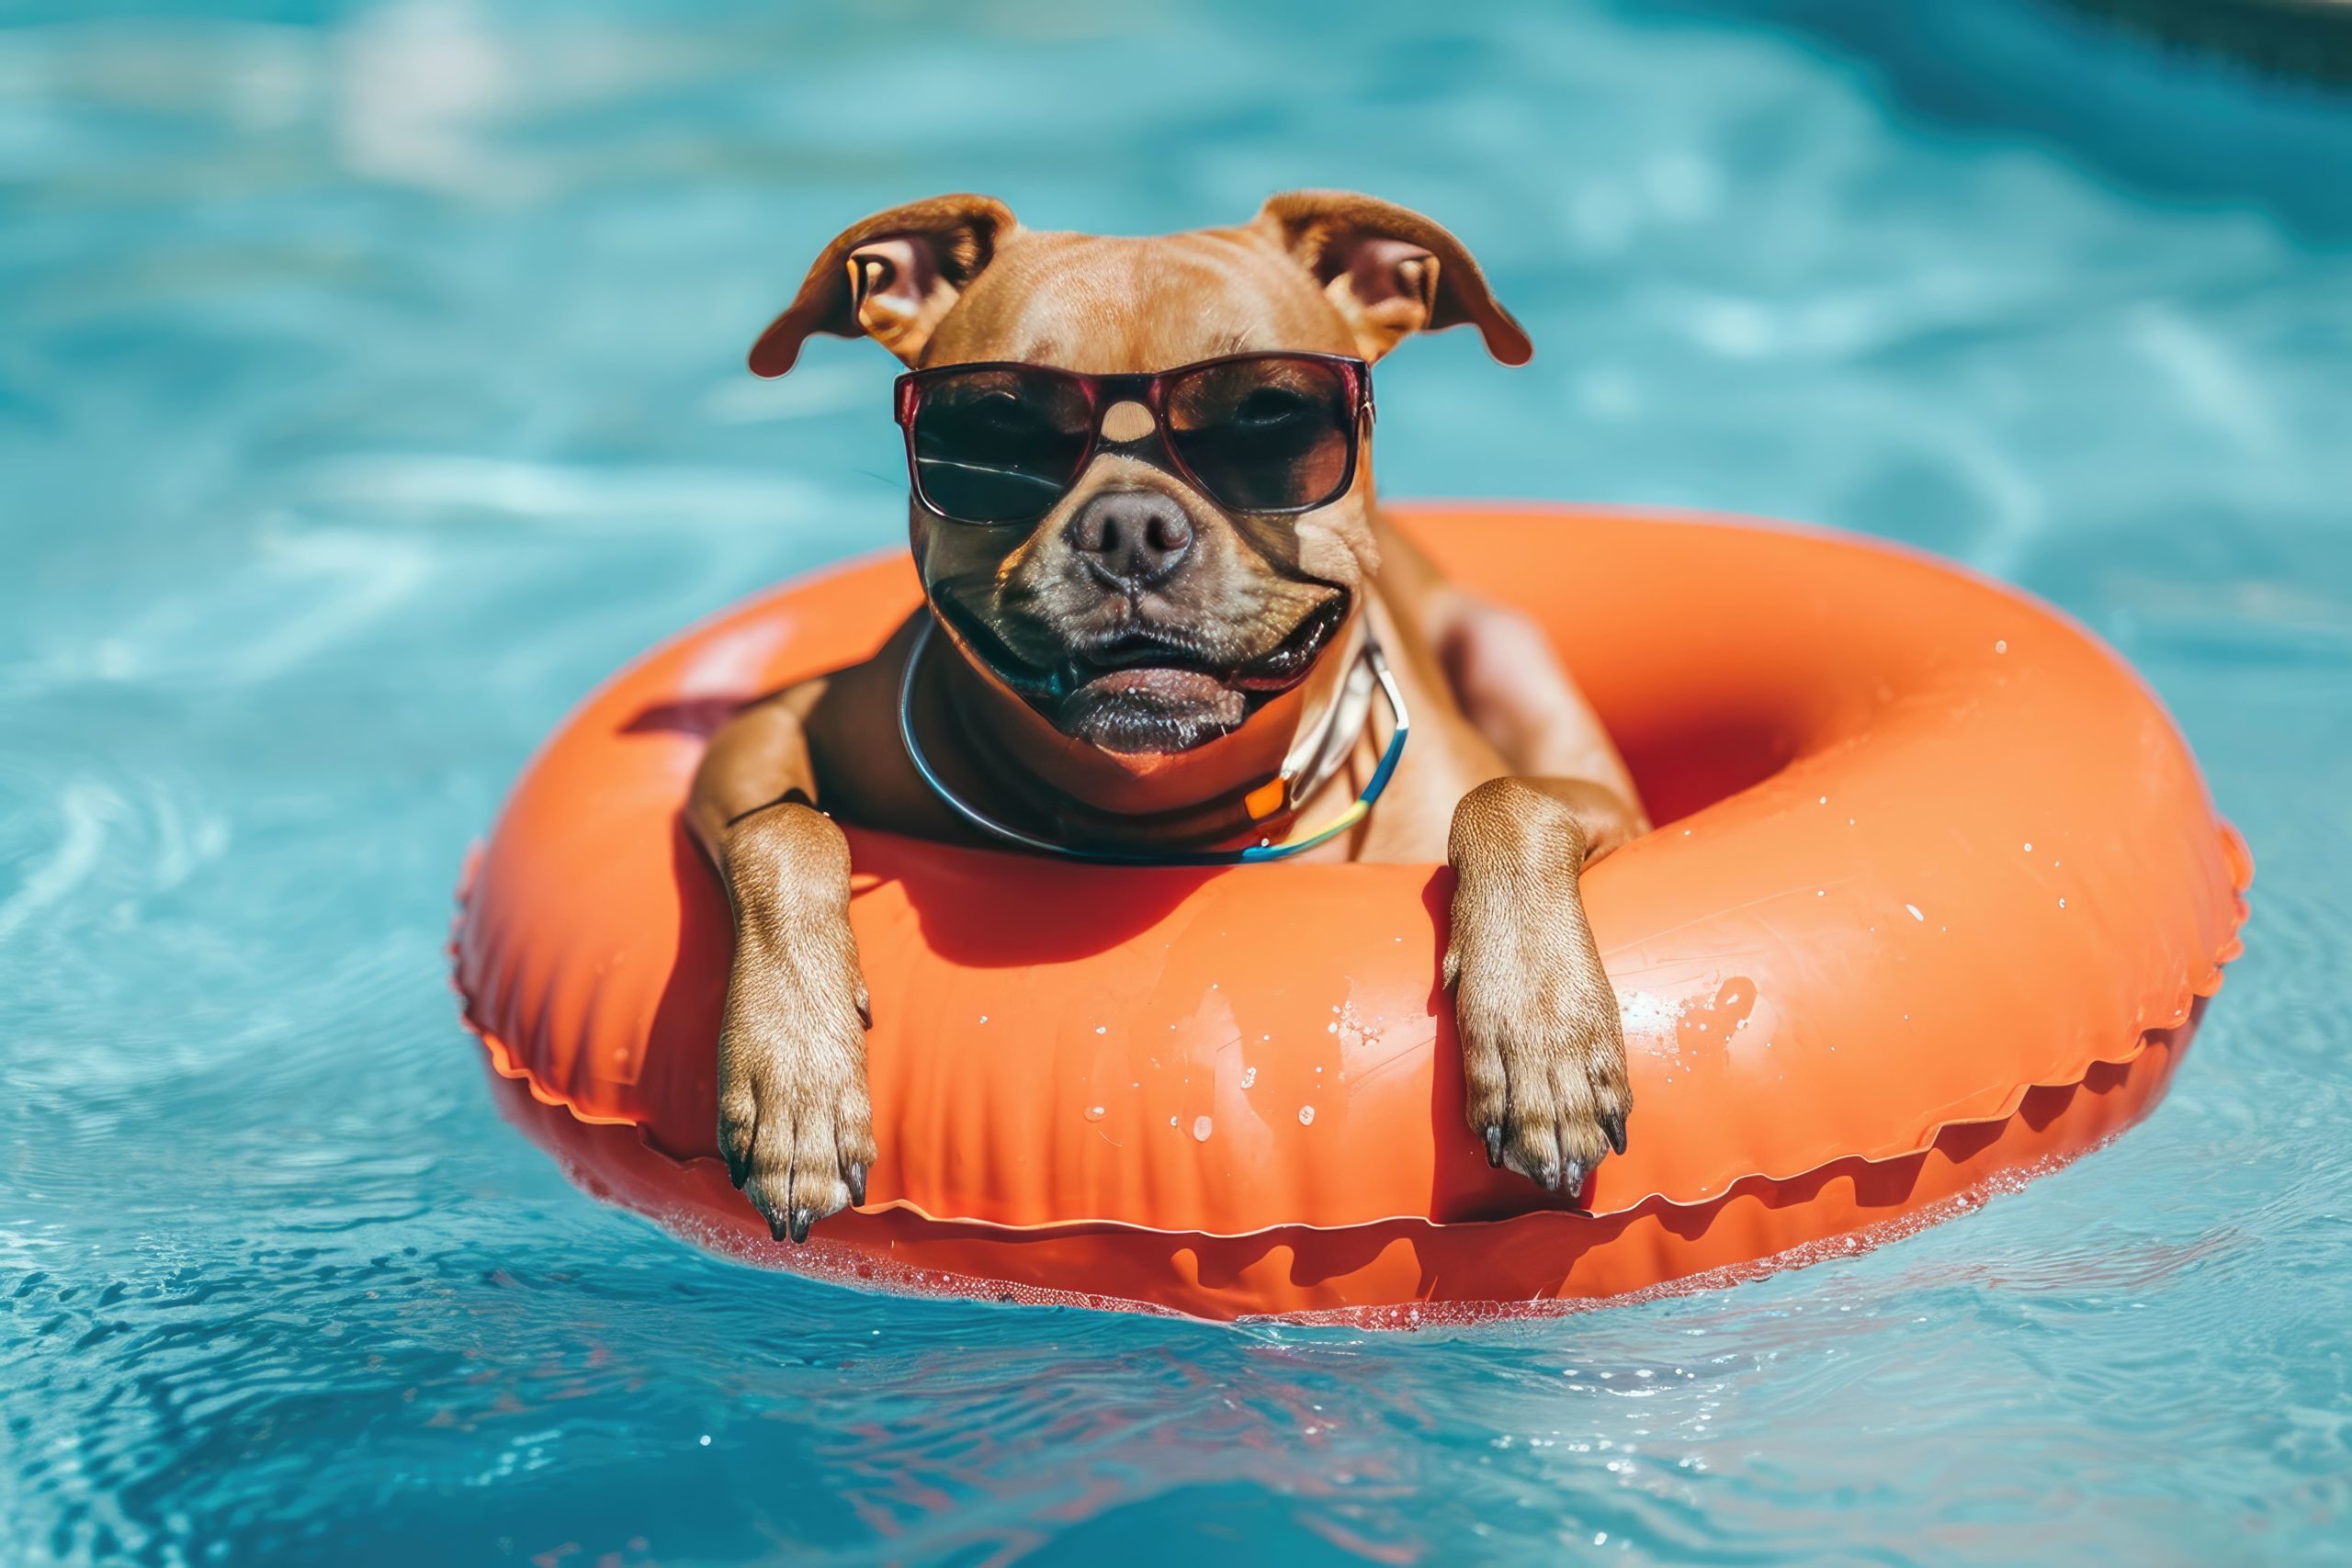 Introducing Puppy to Water : Puppy wearing sunglasses in a pool